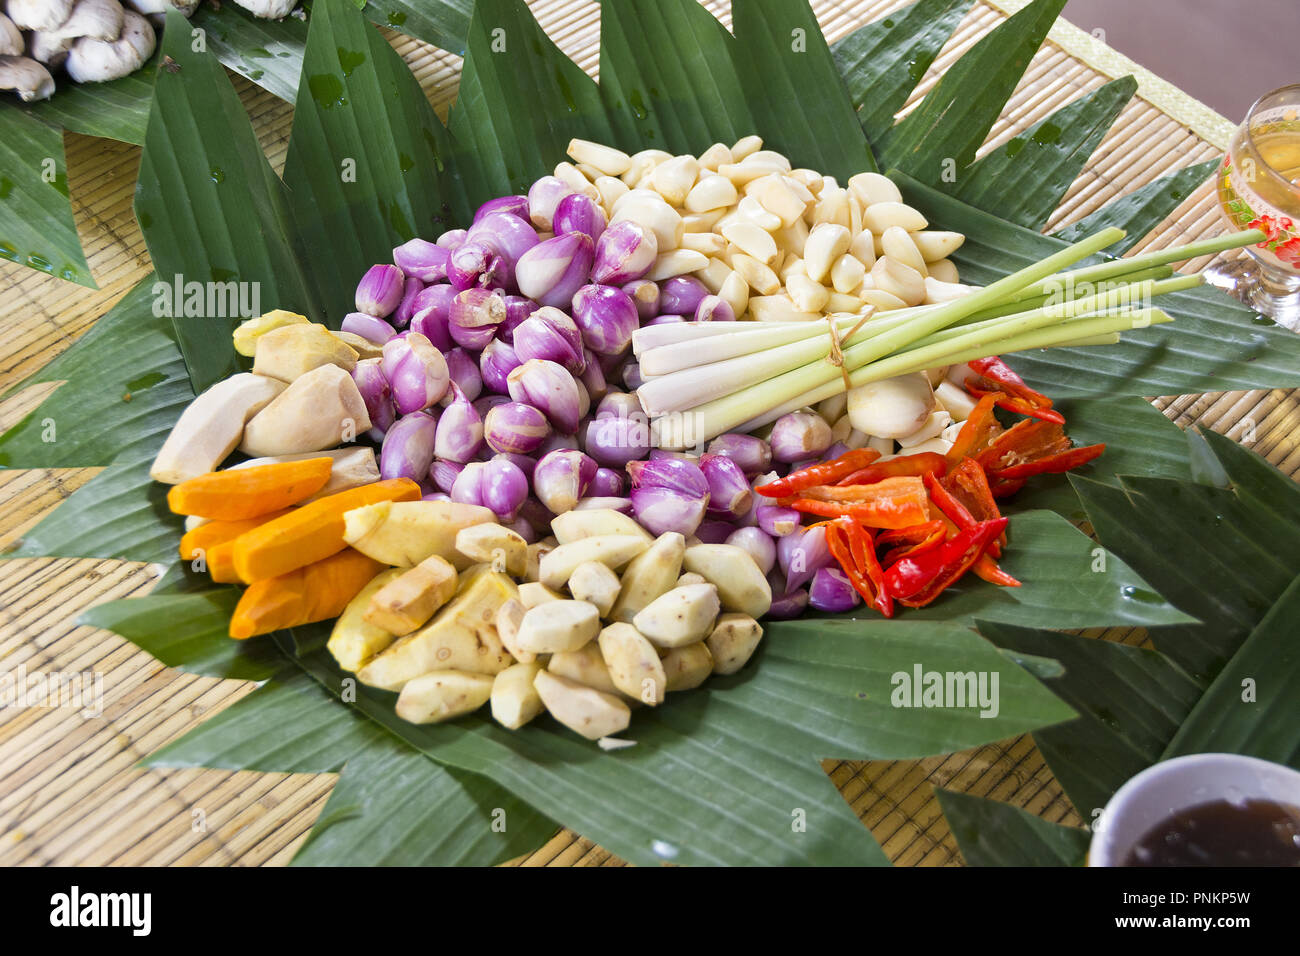 Typical fresh ingredients used in Balinese, Thai and Indonesian cookery. Stock Photo